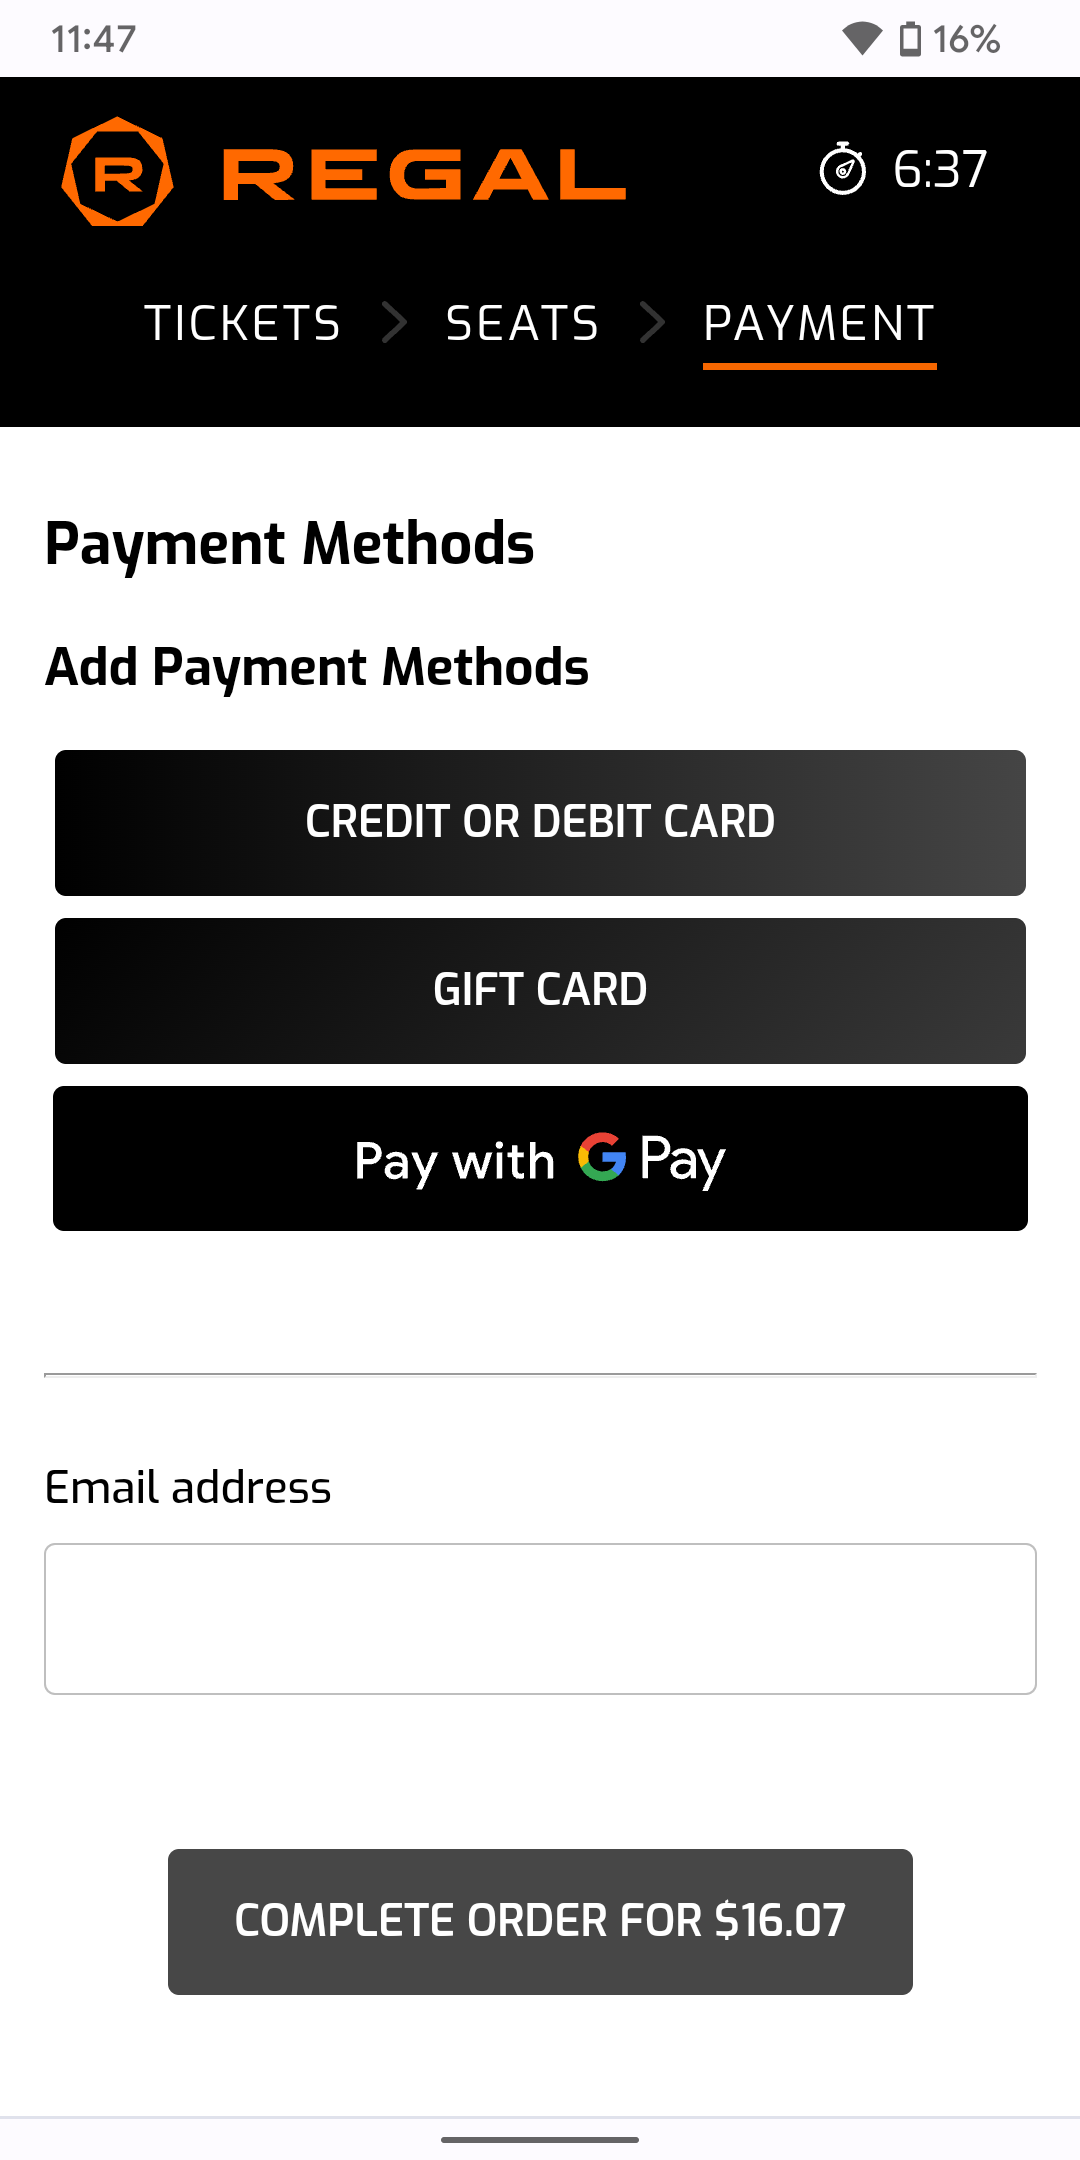 Regal accepts Google Pay on its website.